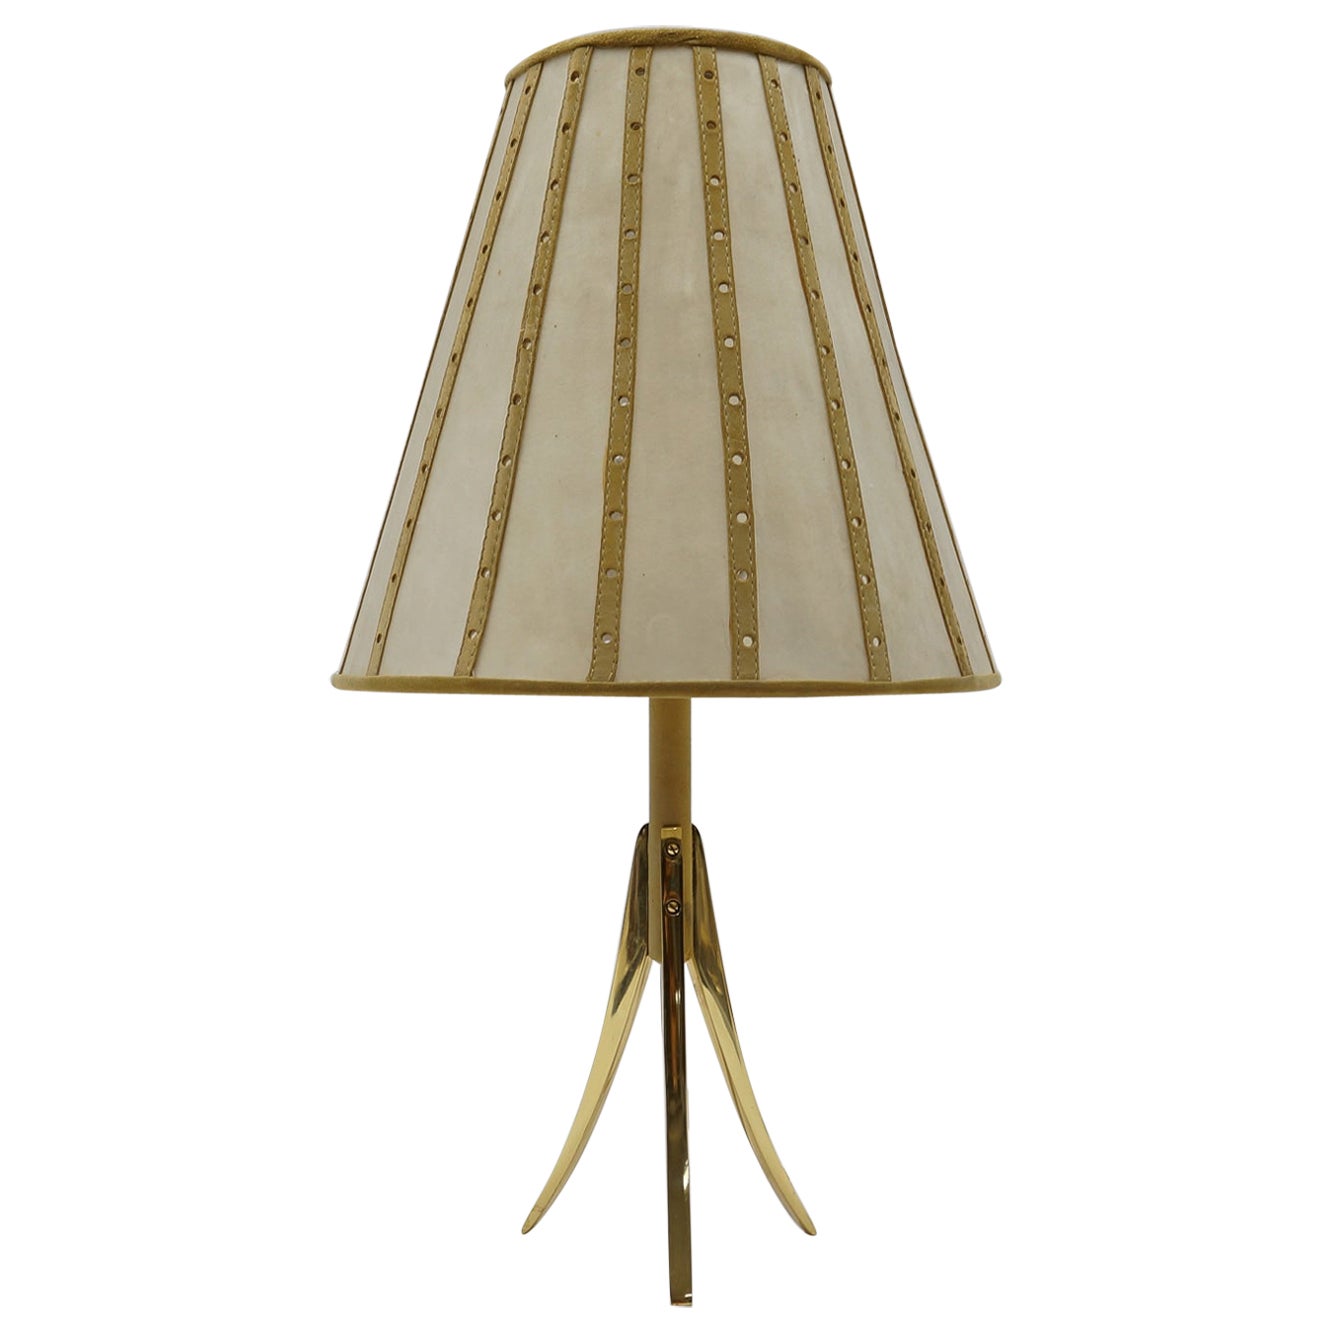 Mid-Century Modern Tripod Table Lamp made in Brass and Leather, 1960s Austria 